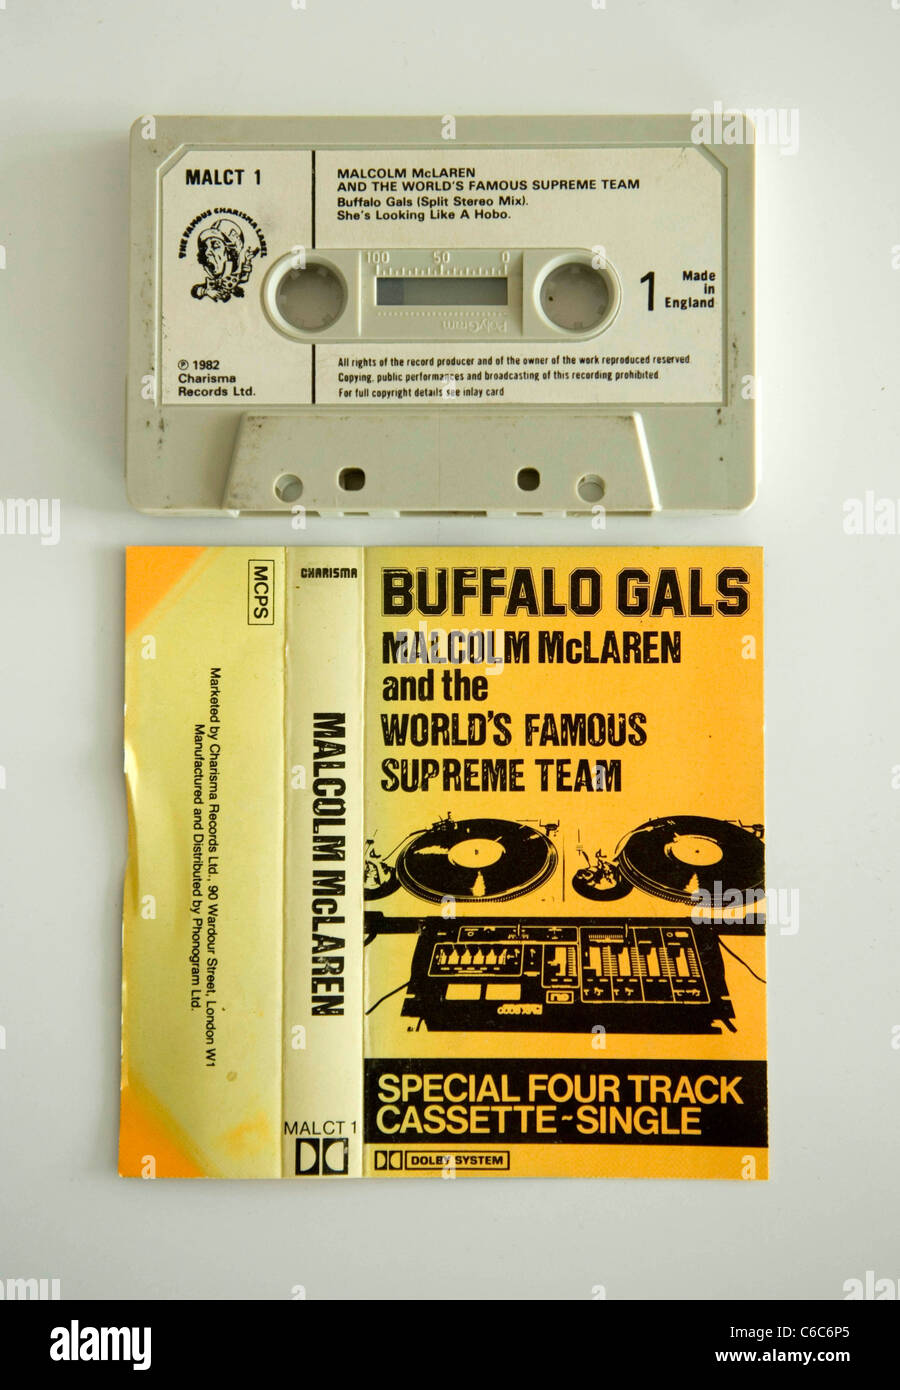 McLaren and the worlds famous supreme team Gals" cassette single Photo - Alamy